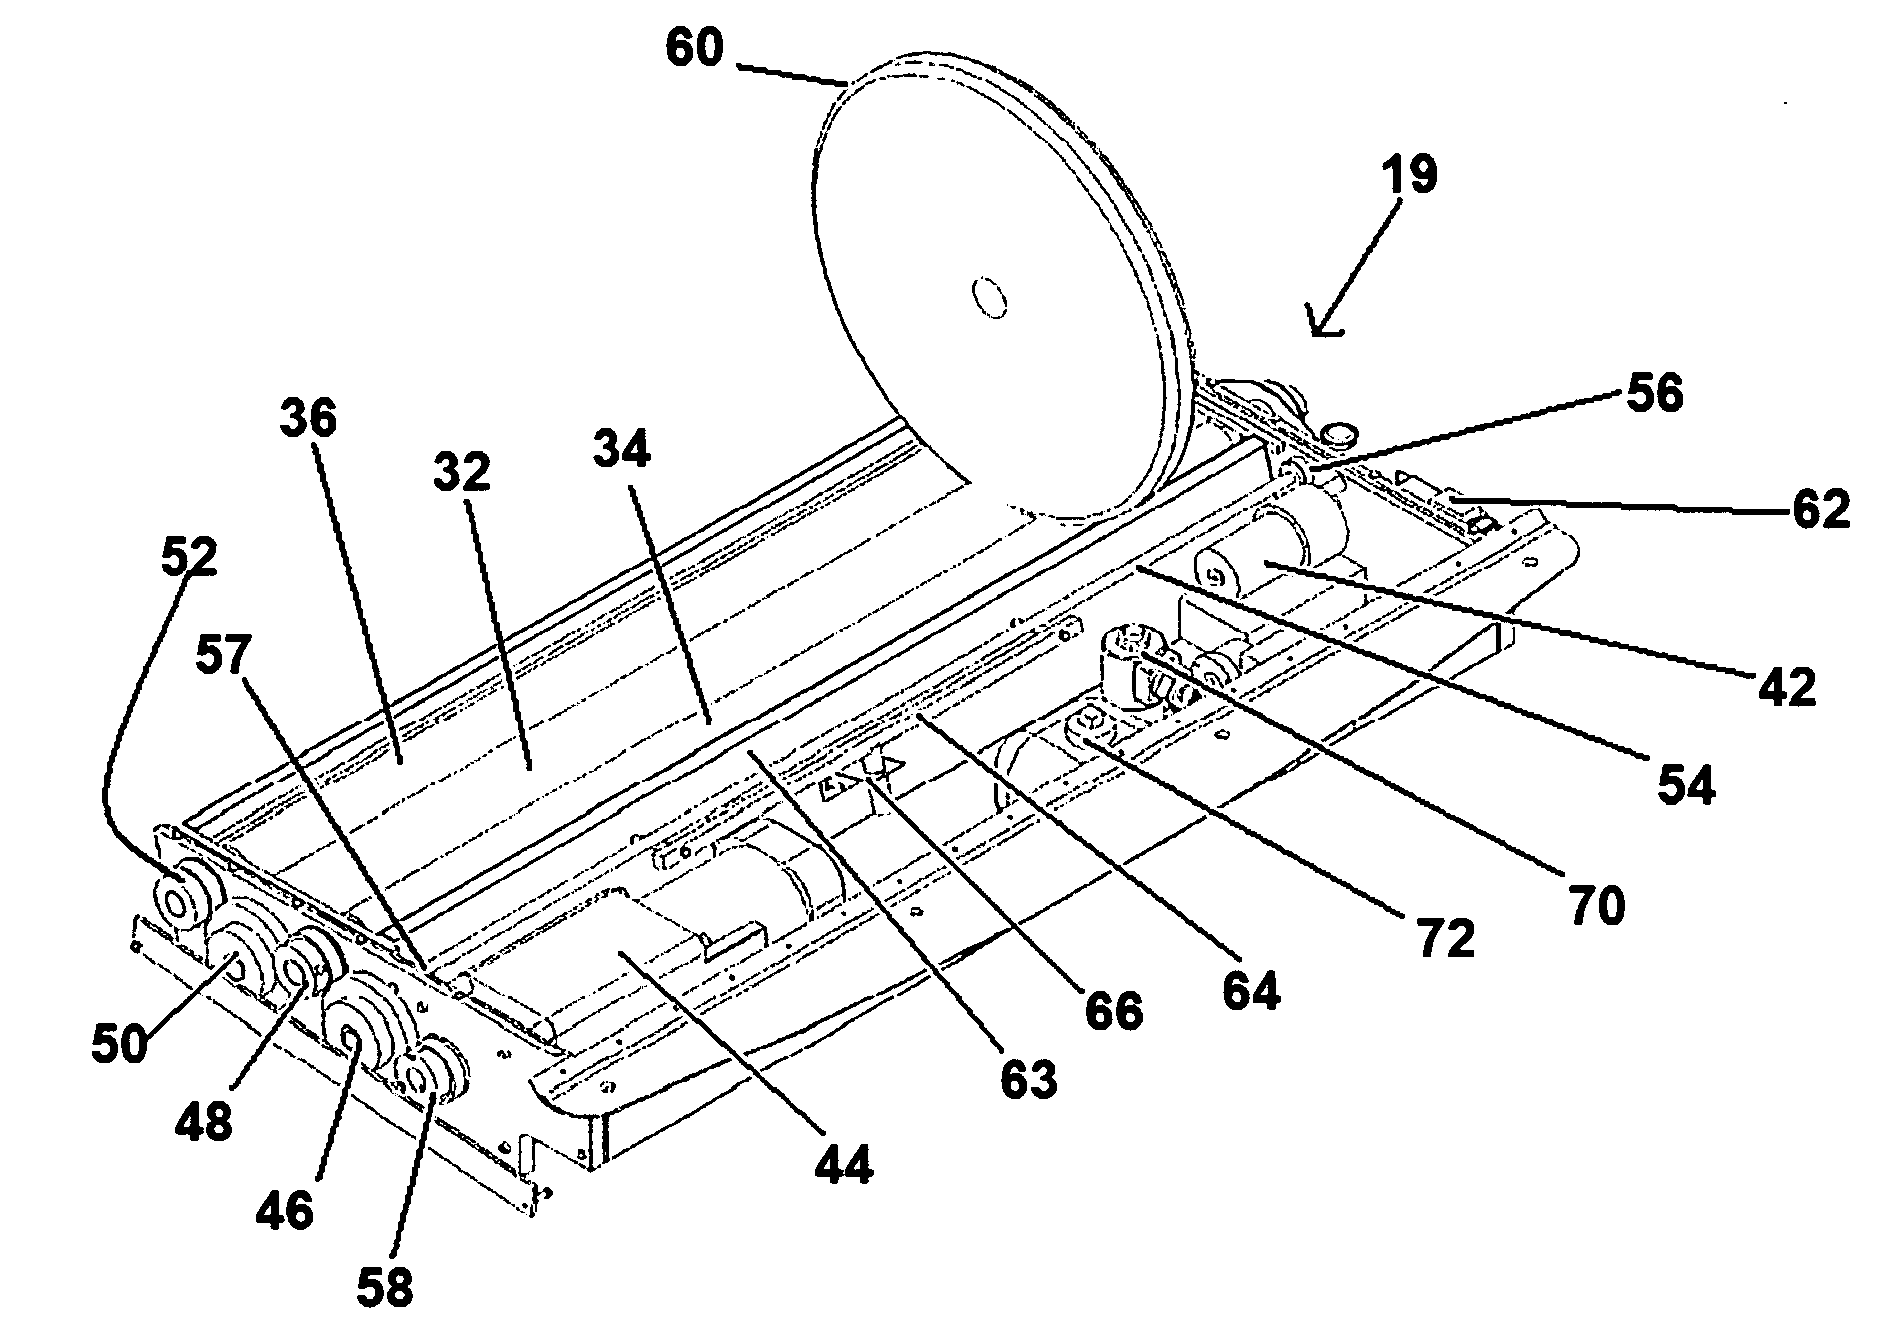 Wheel cleaning apparatus for a wheelchair or the like